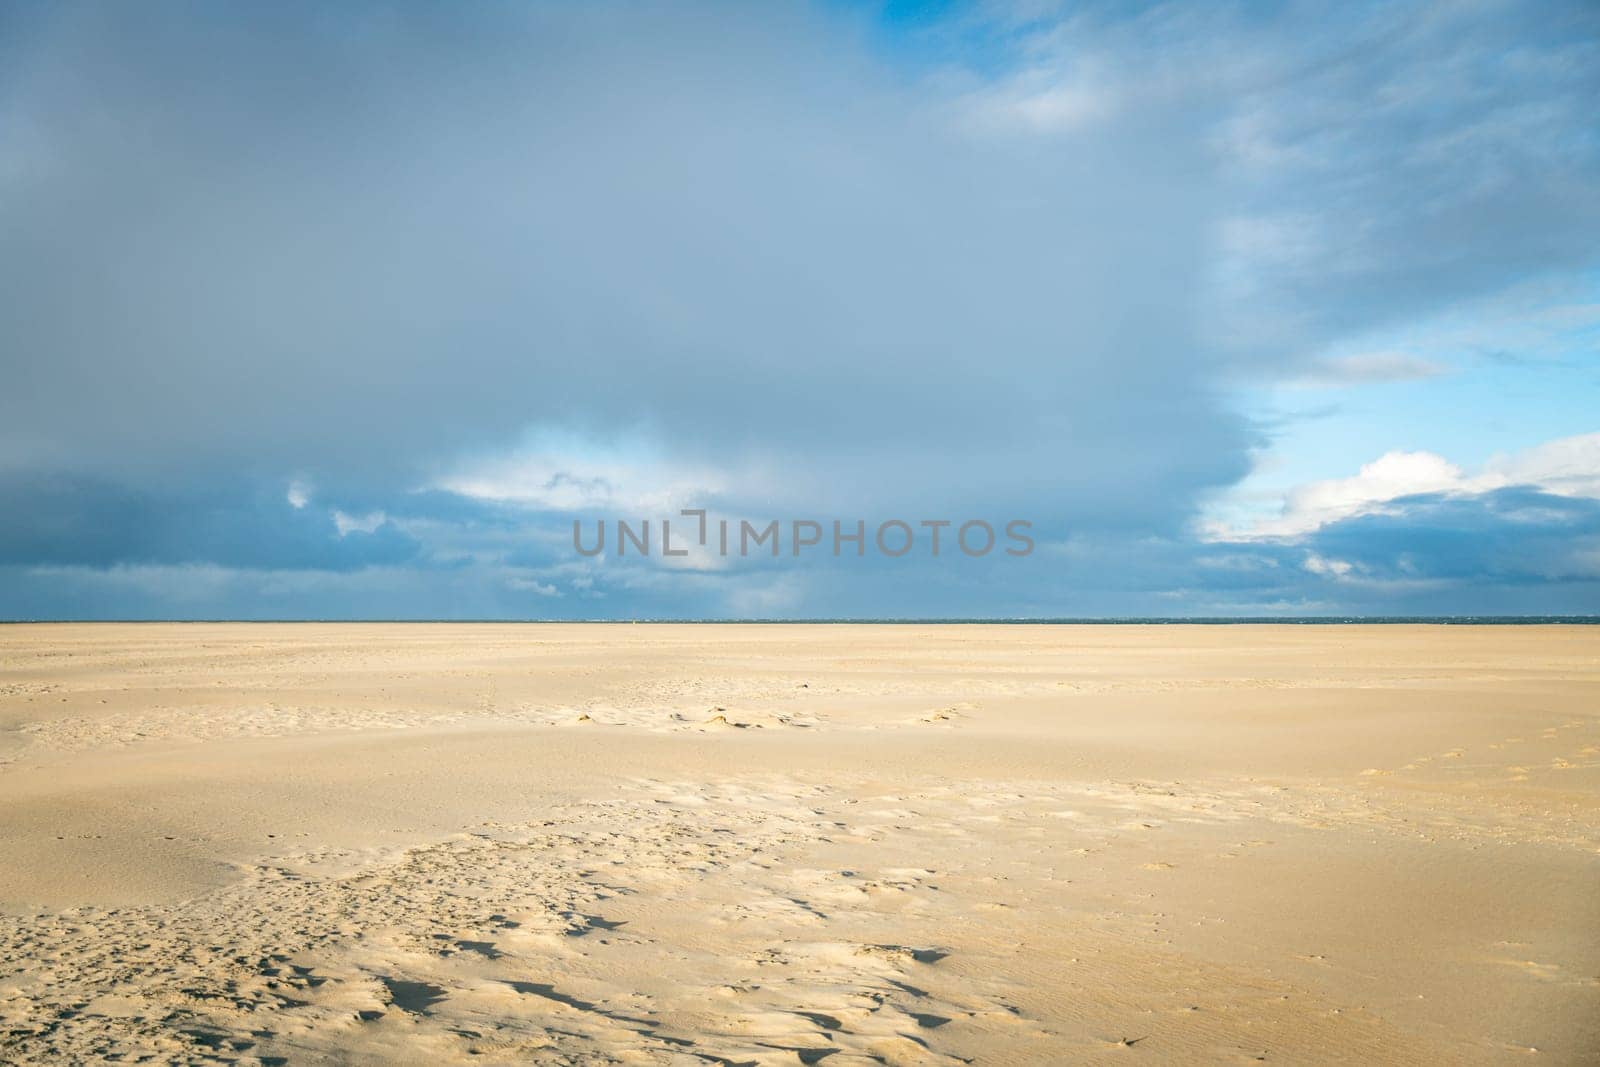 the large empty beach on the island of Texel with the horizon and dark clouds in the background